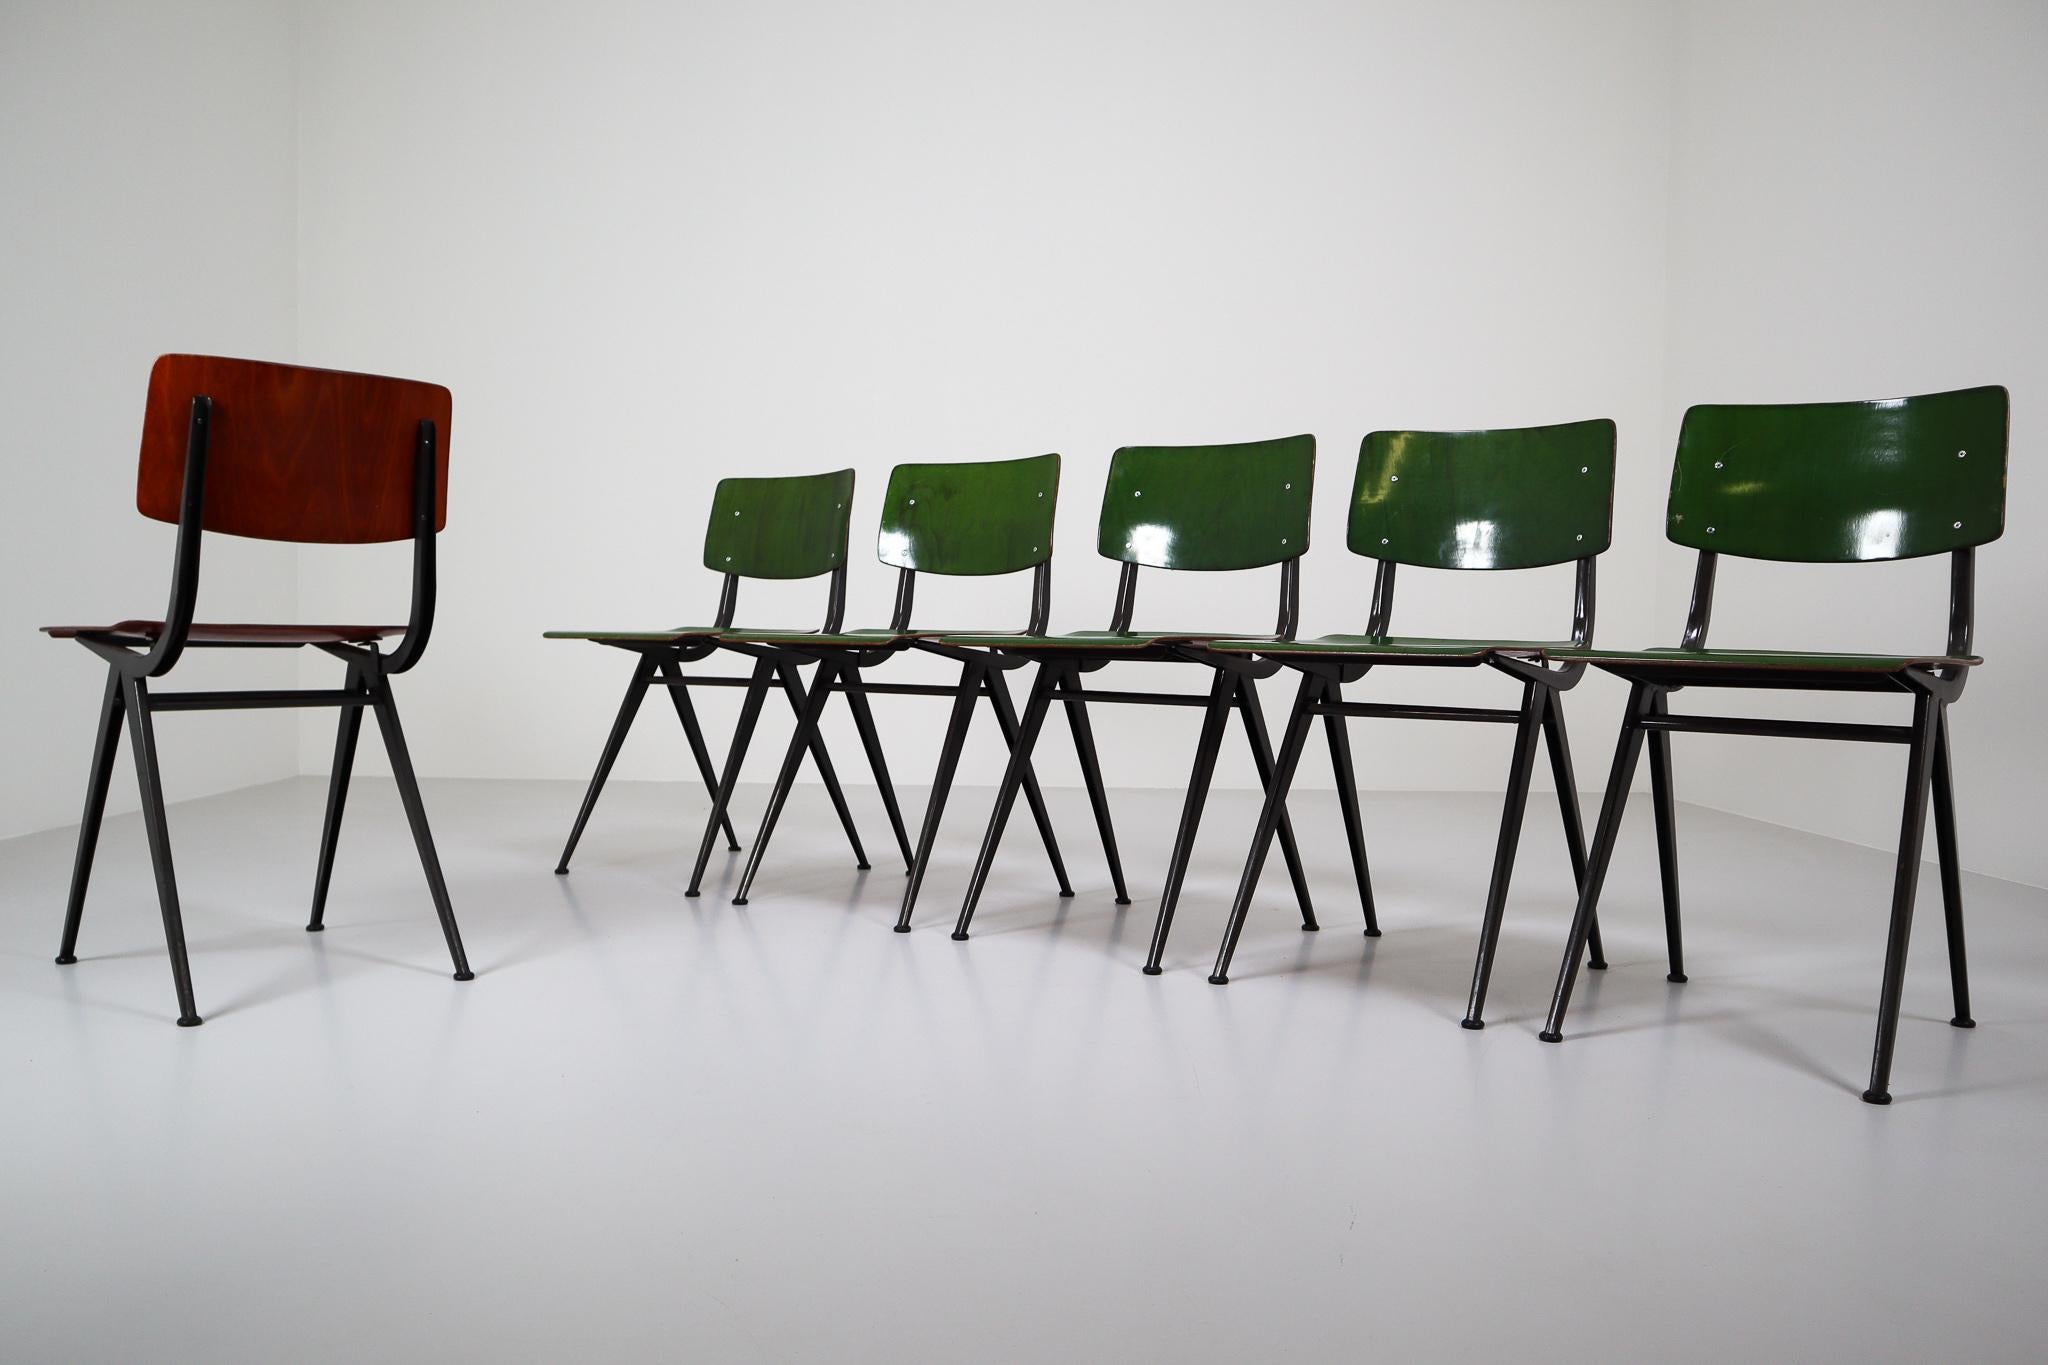 Plywood Six Compass Shaped Industrial Chairs by Marko Holland 1960s in Green Patina